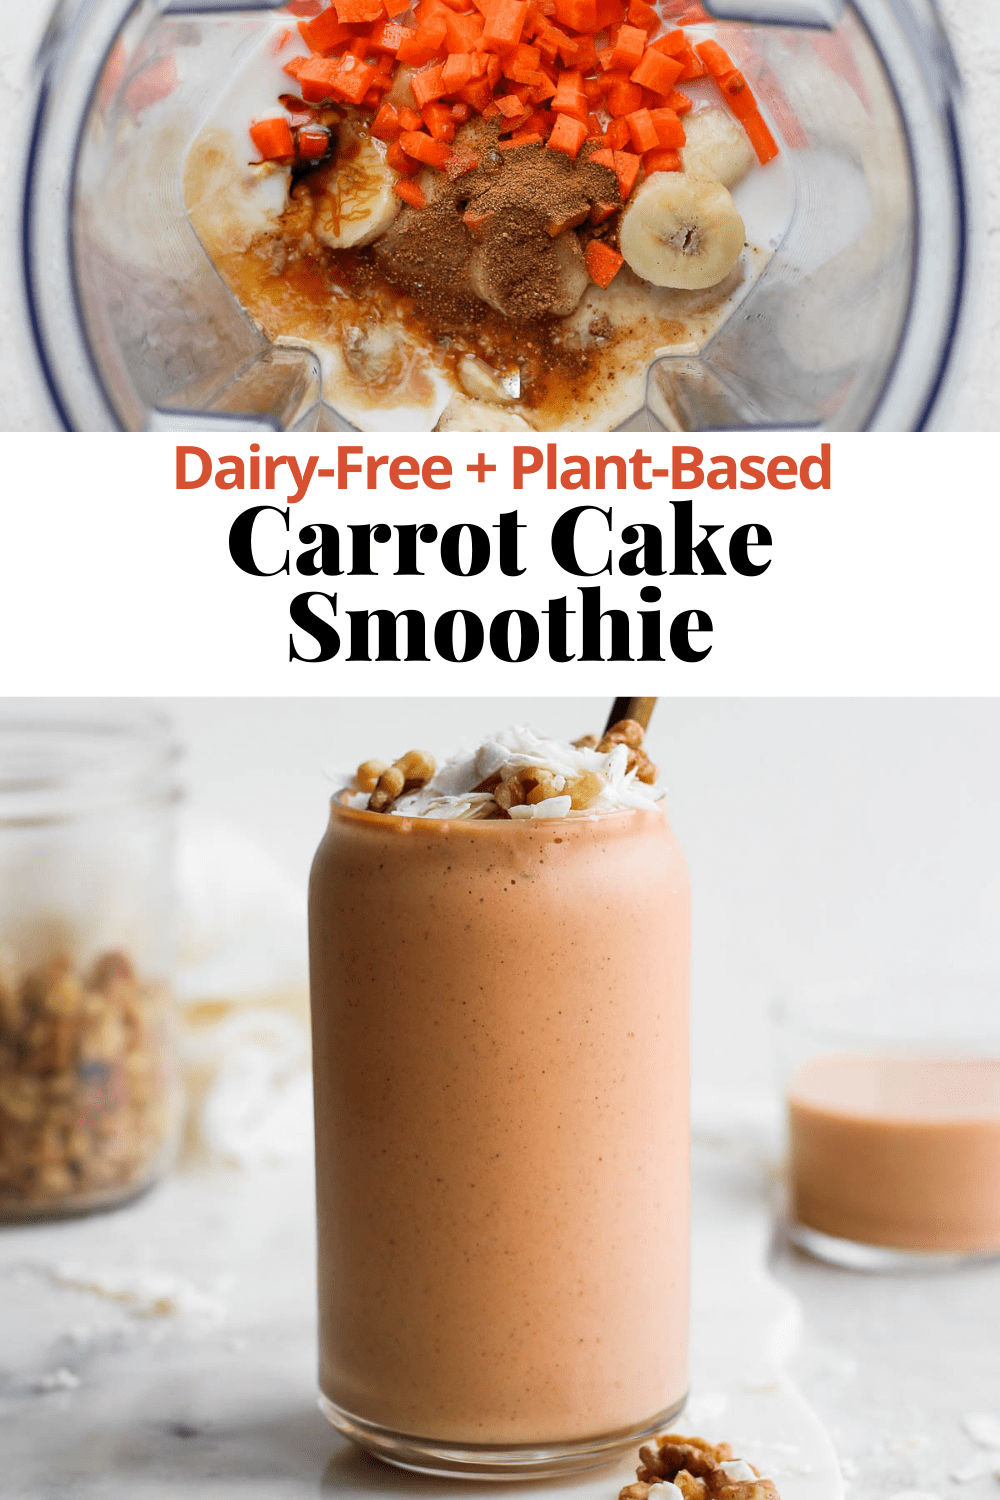 Pinterest image for a carrot cake smoothie.